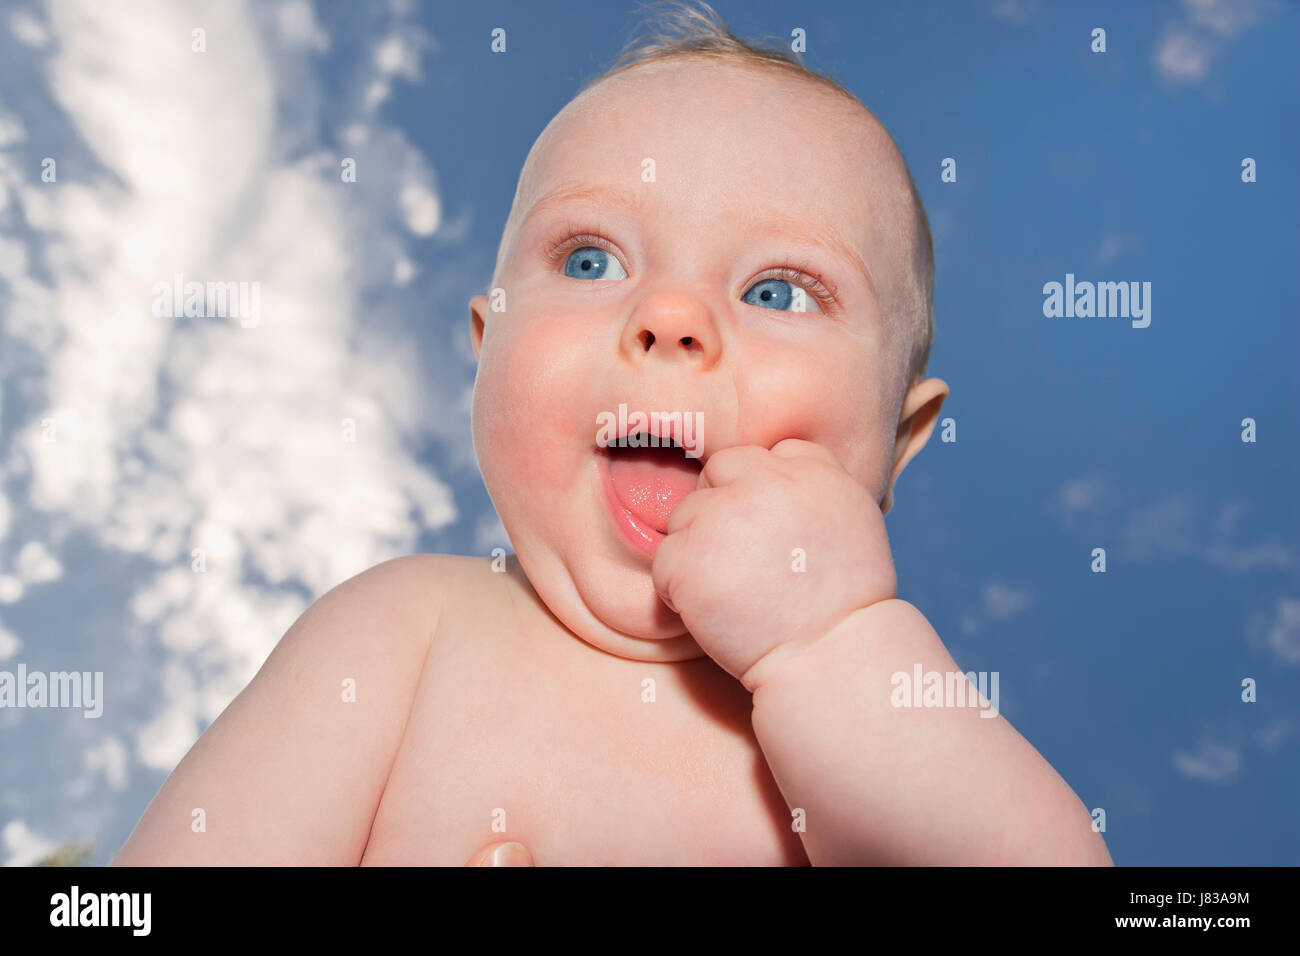 baby against blue sky Stock Photo